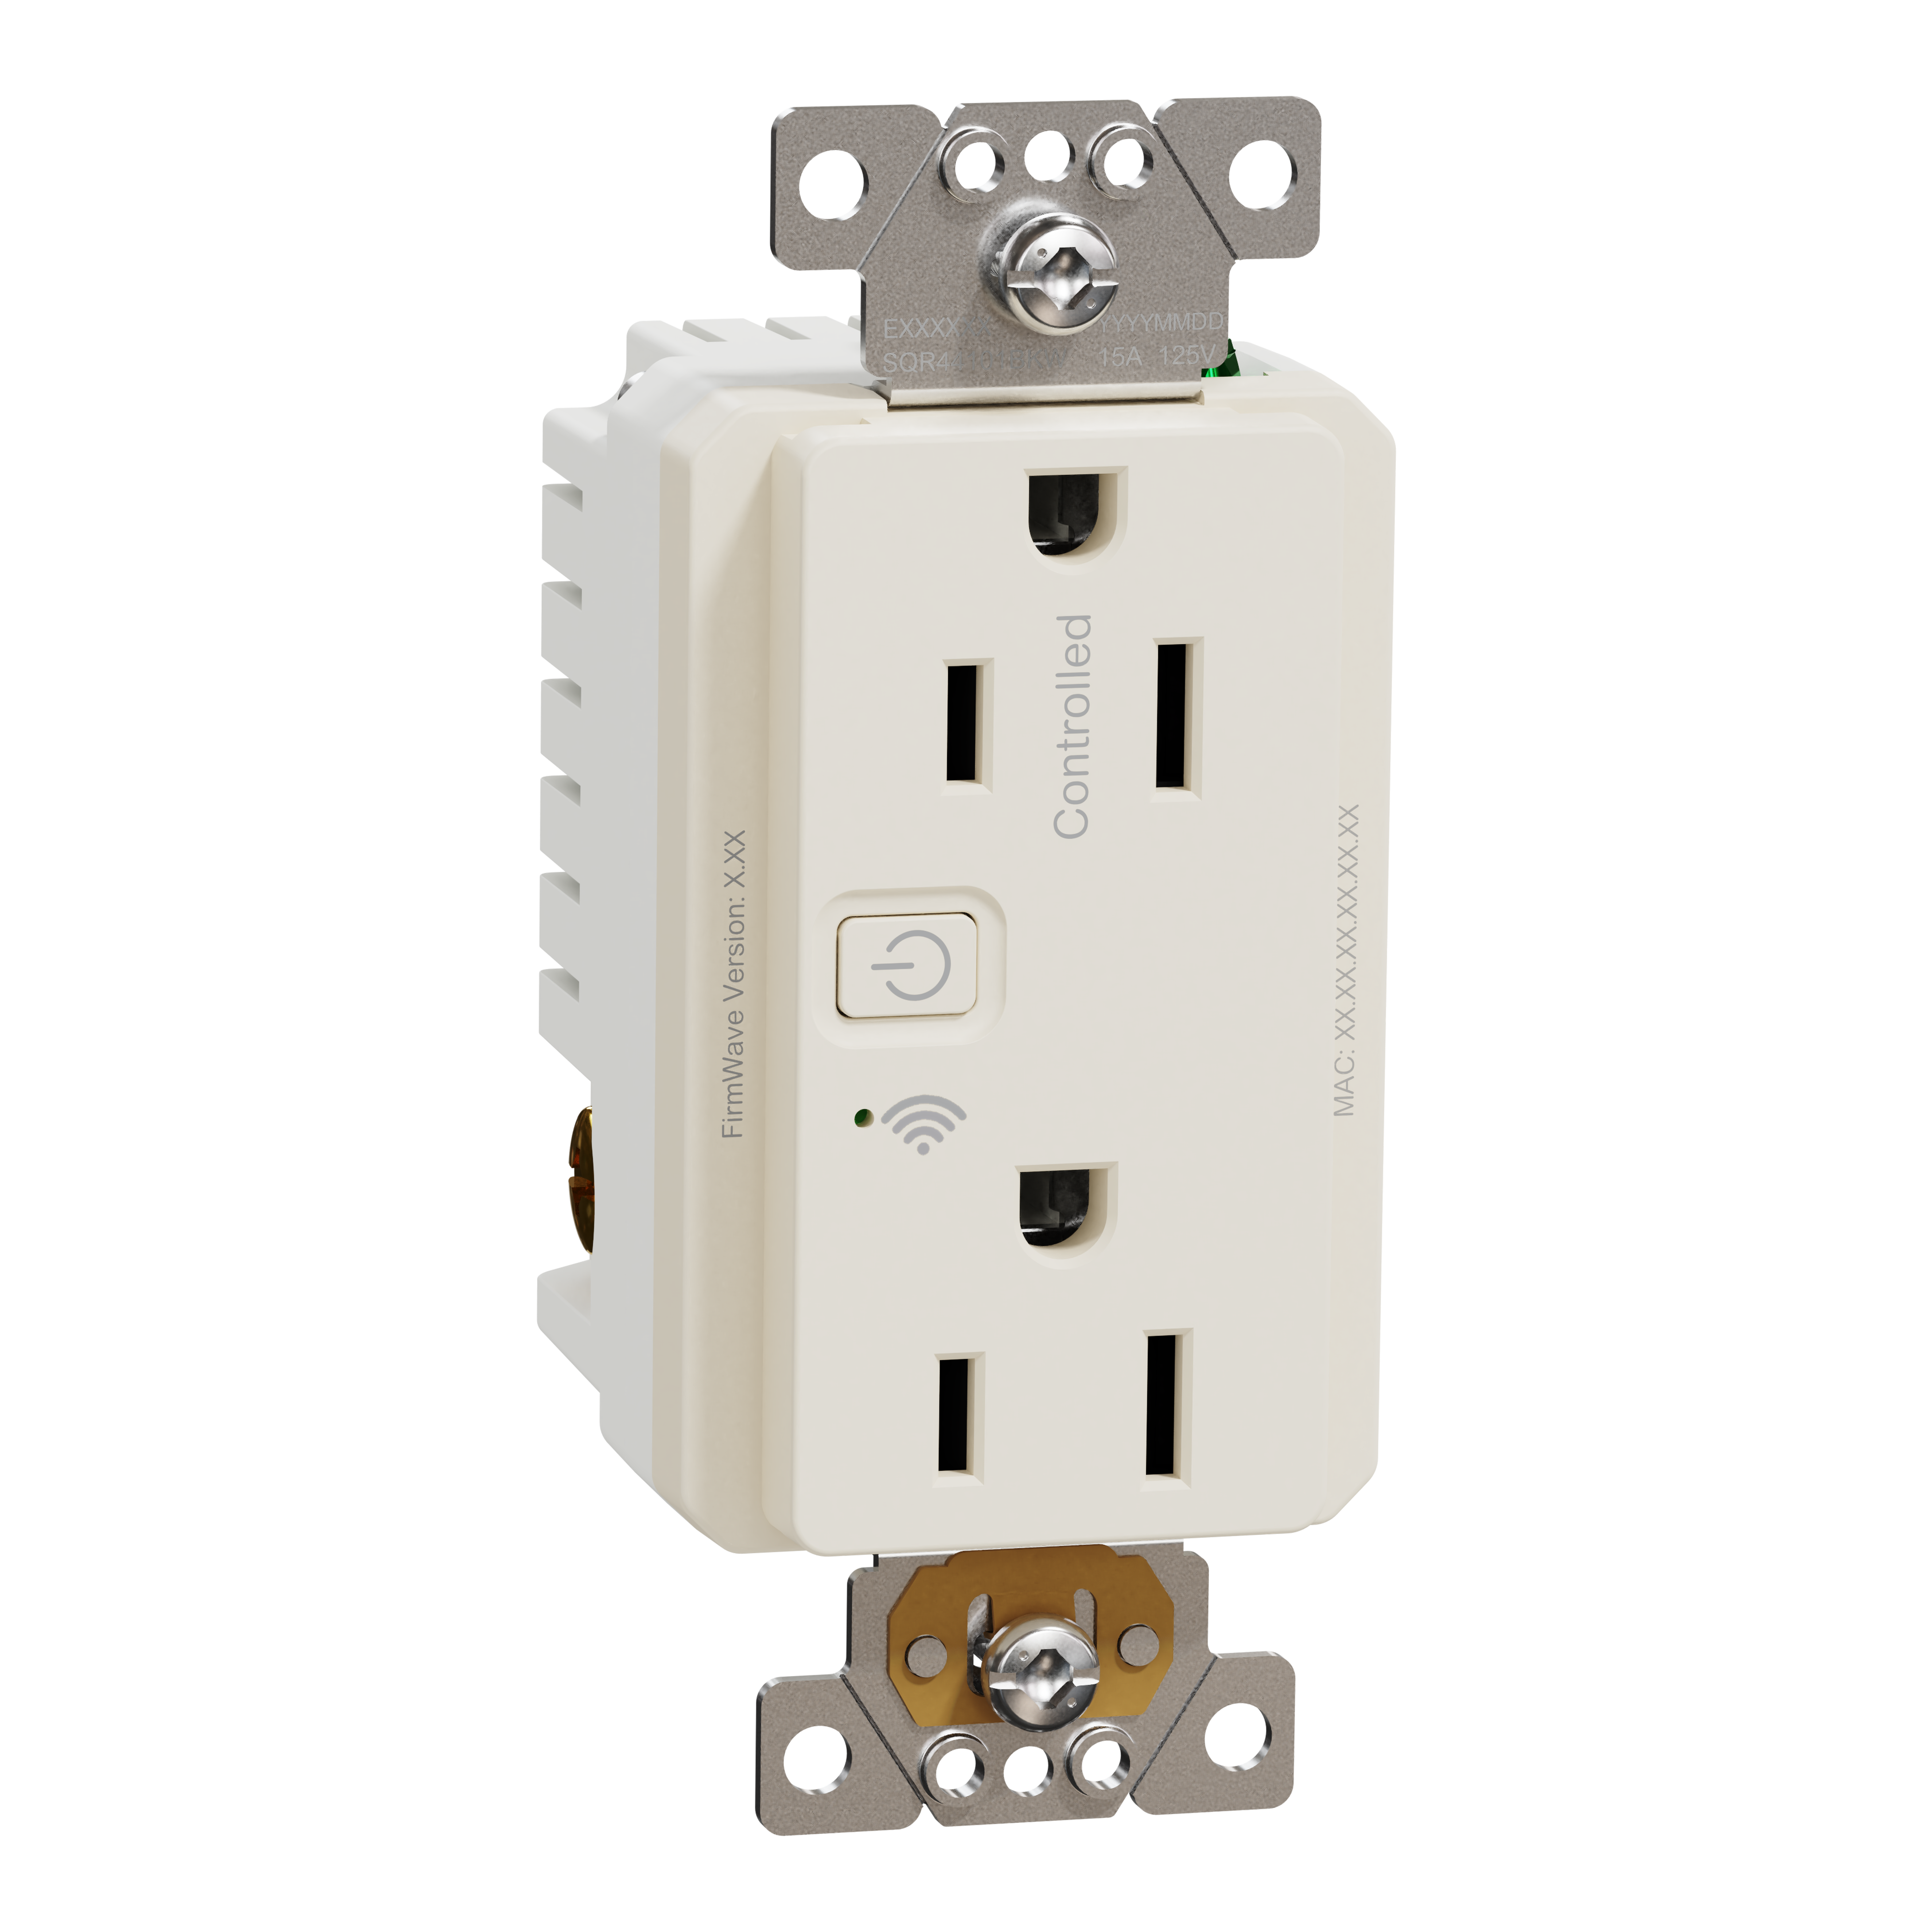 Socket-outlet, X Series, 15A, decorator, tamper resistant, WiFi connected, light almond, matte finish